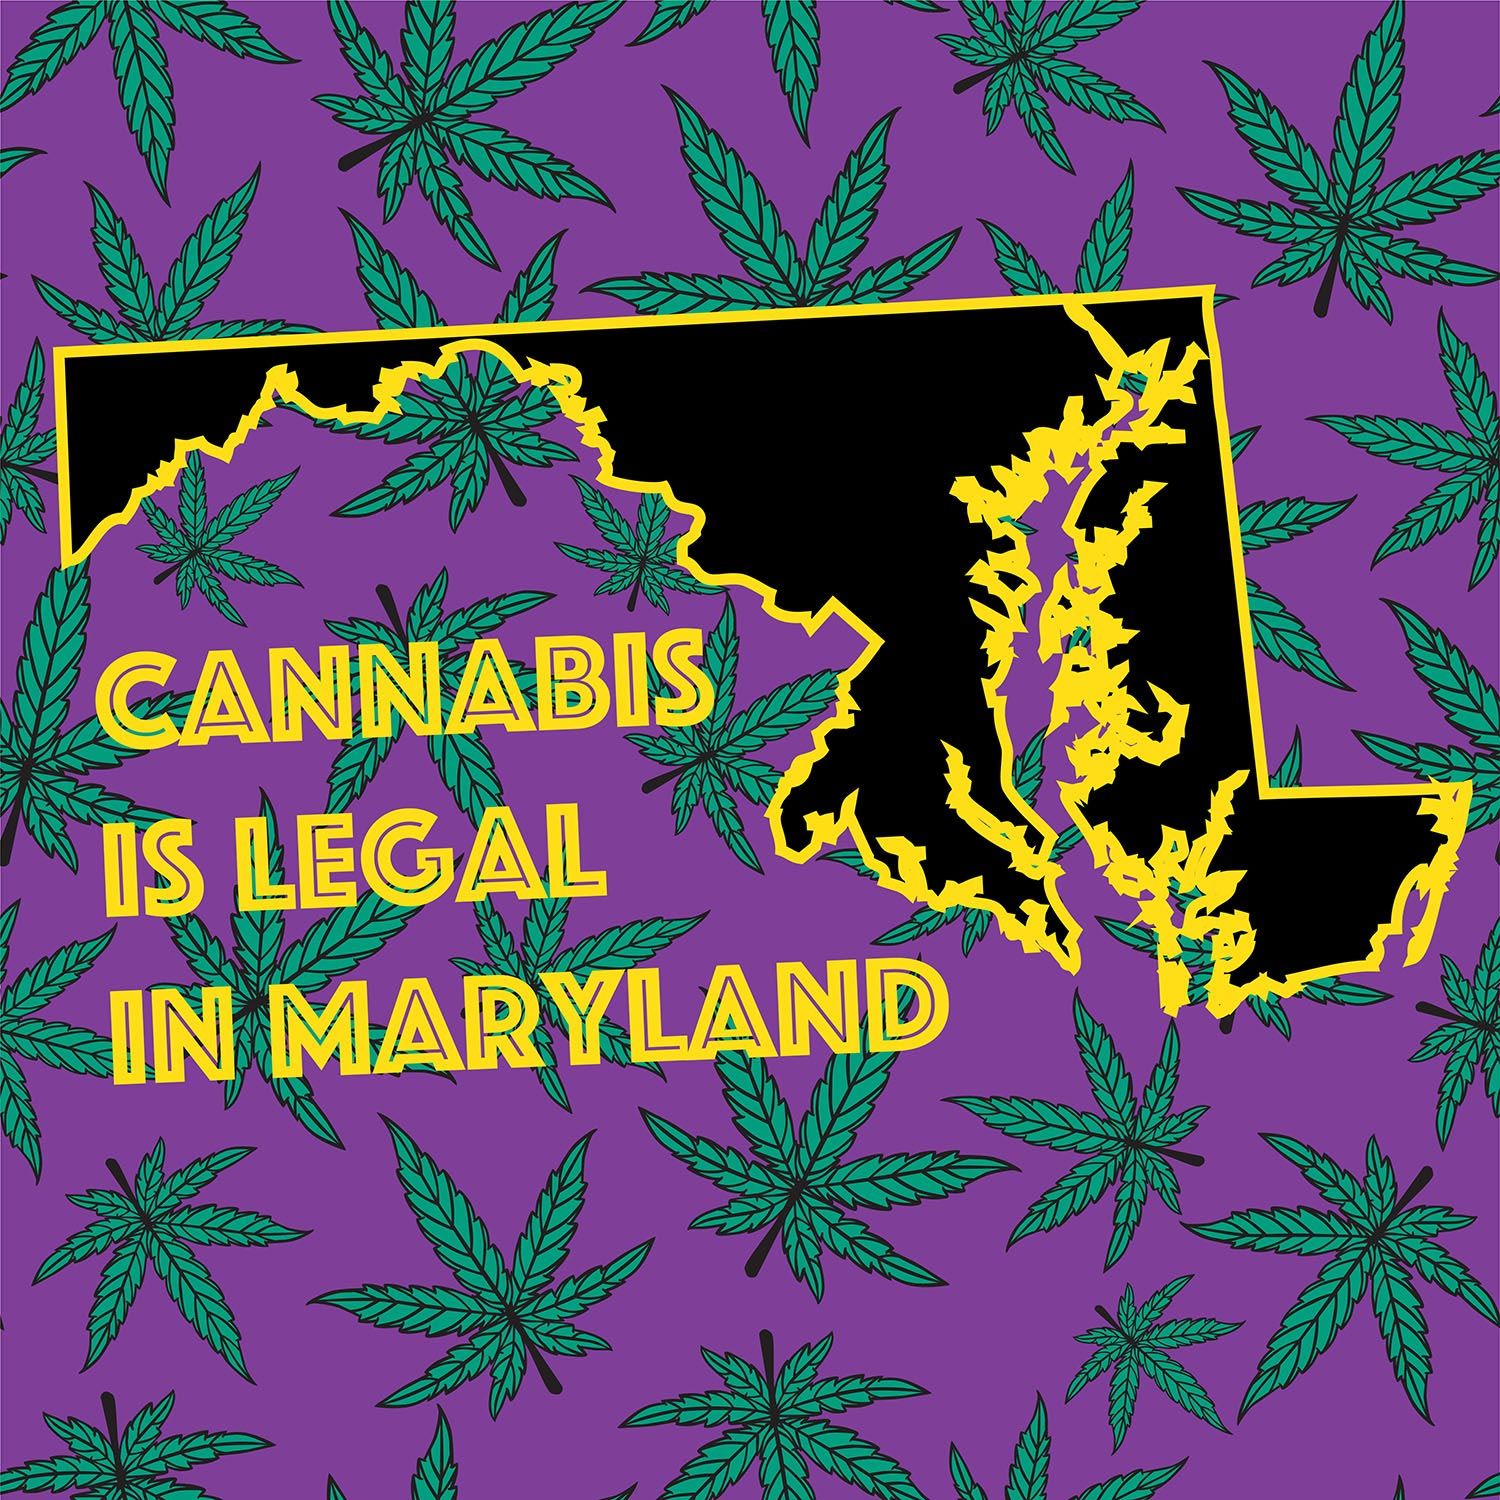 cannabis laws in maryland | what are the cannabis laws in maryland | cannabis sales maryland | maryland cannabis storage